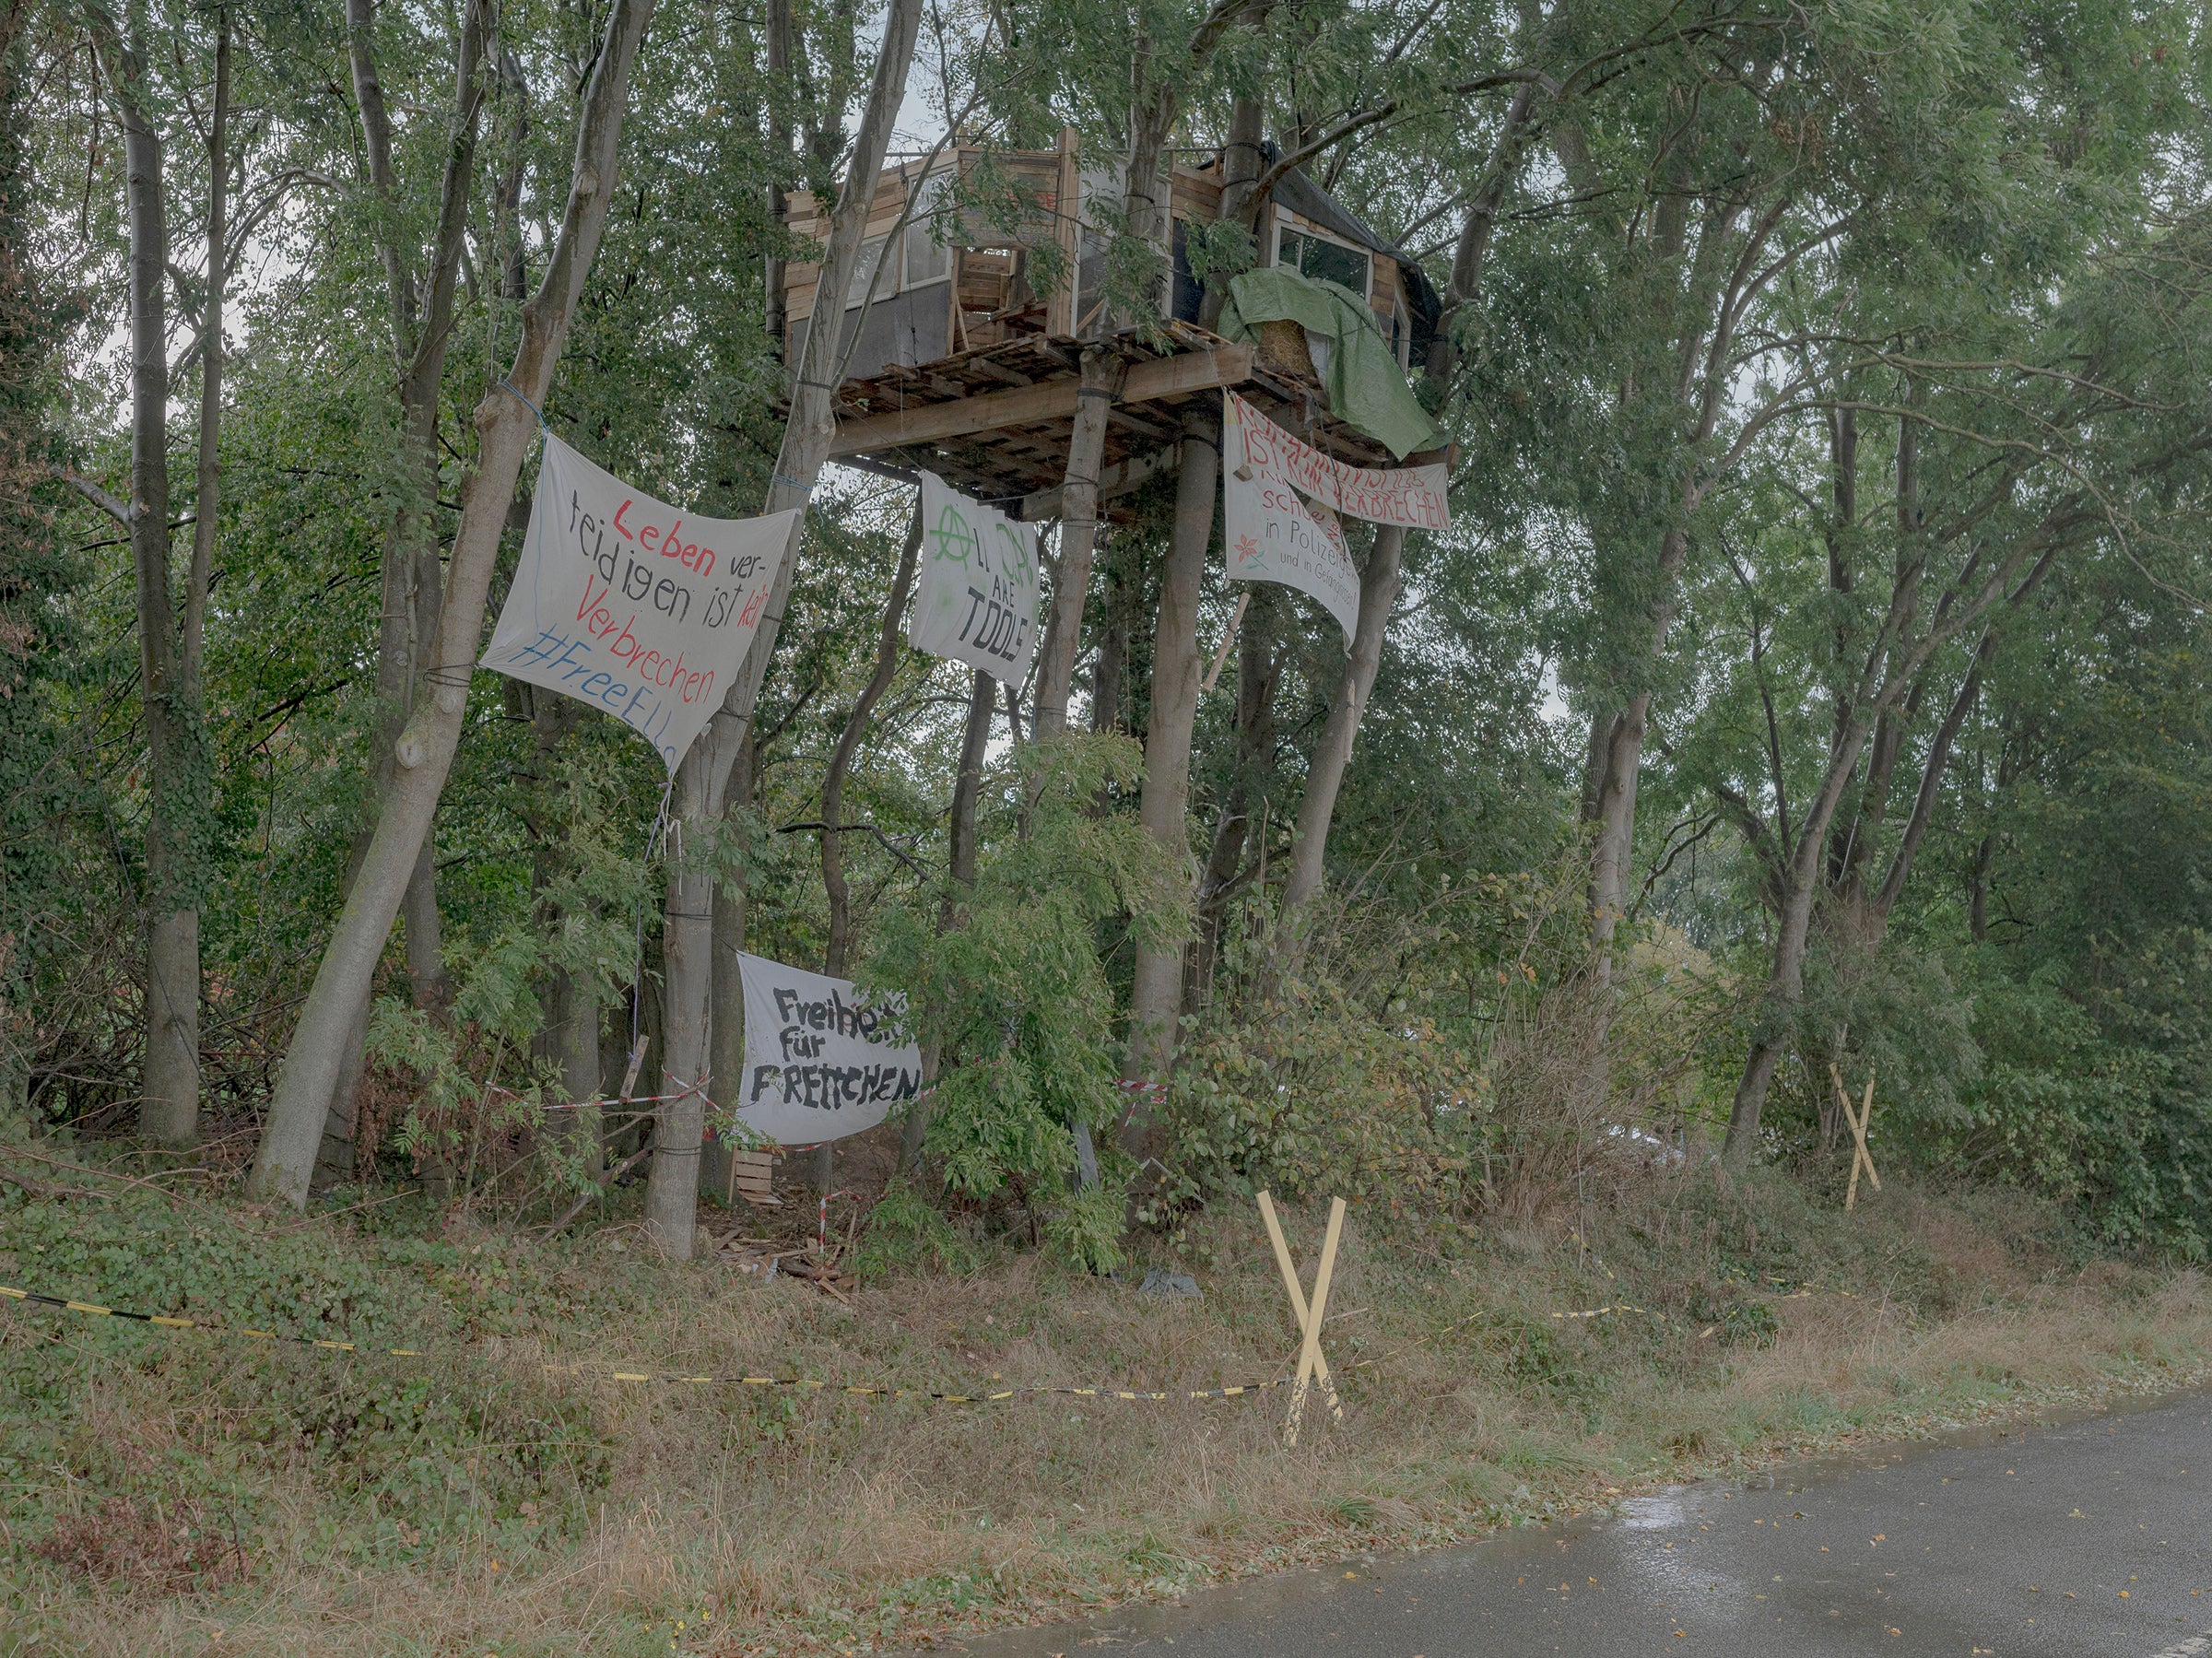 A treehouse and protest signs used by environmental activists in Luetzerath